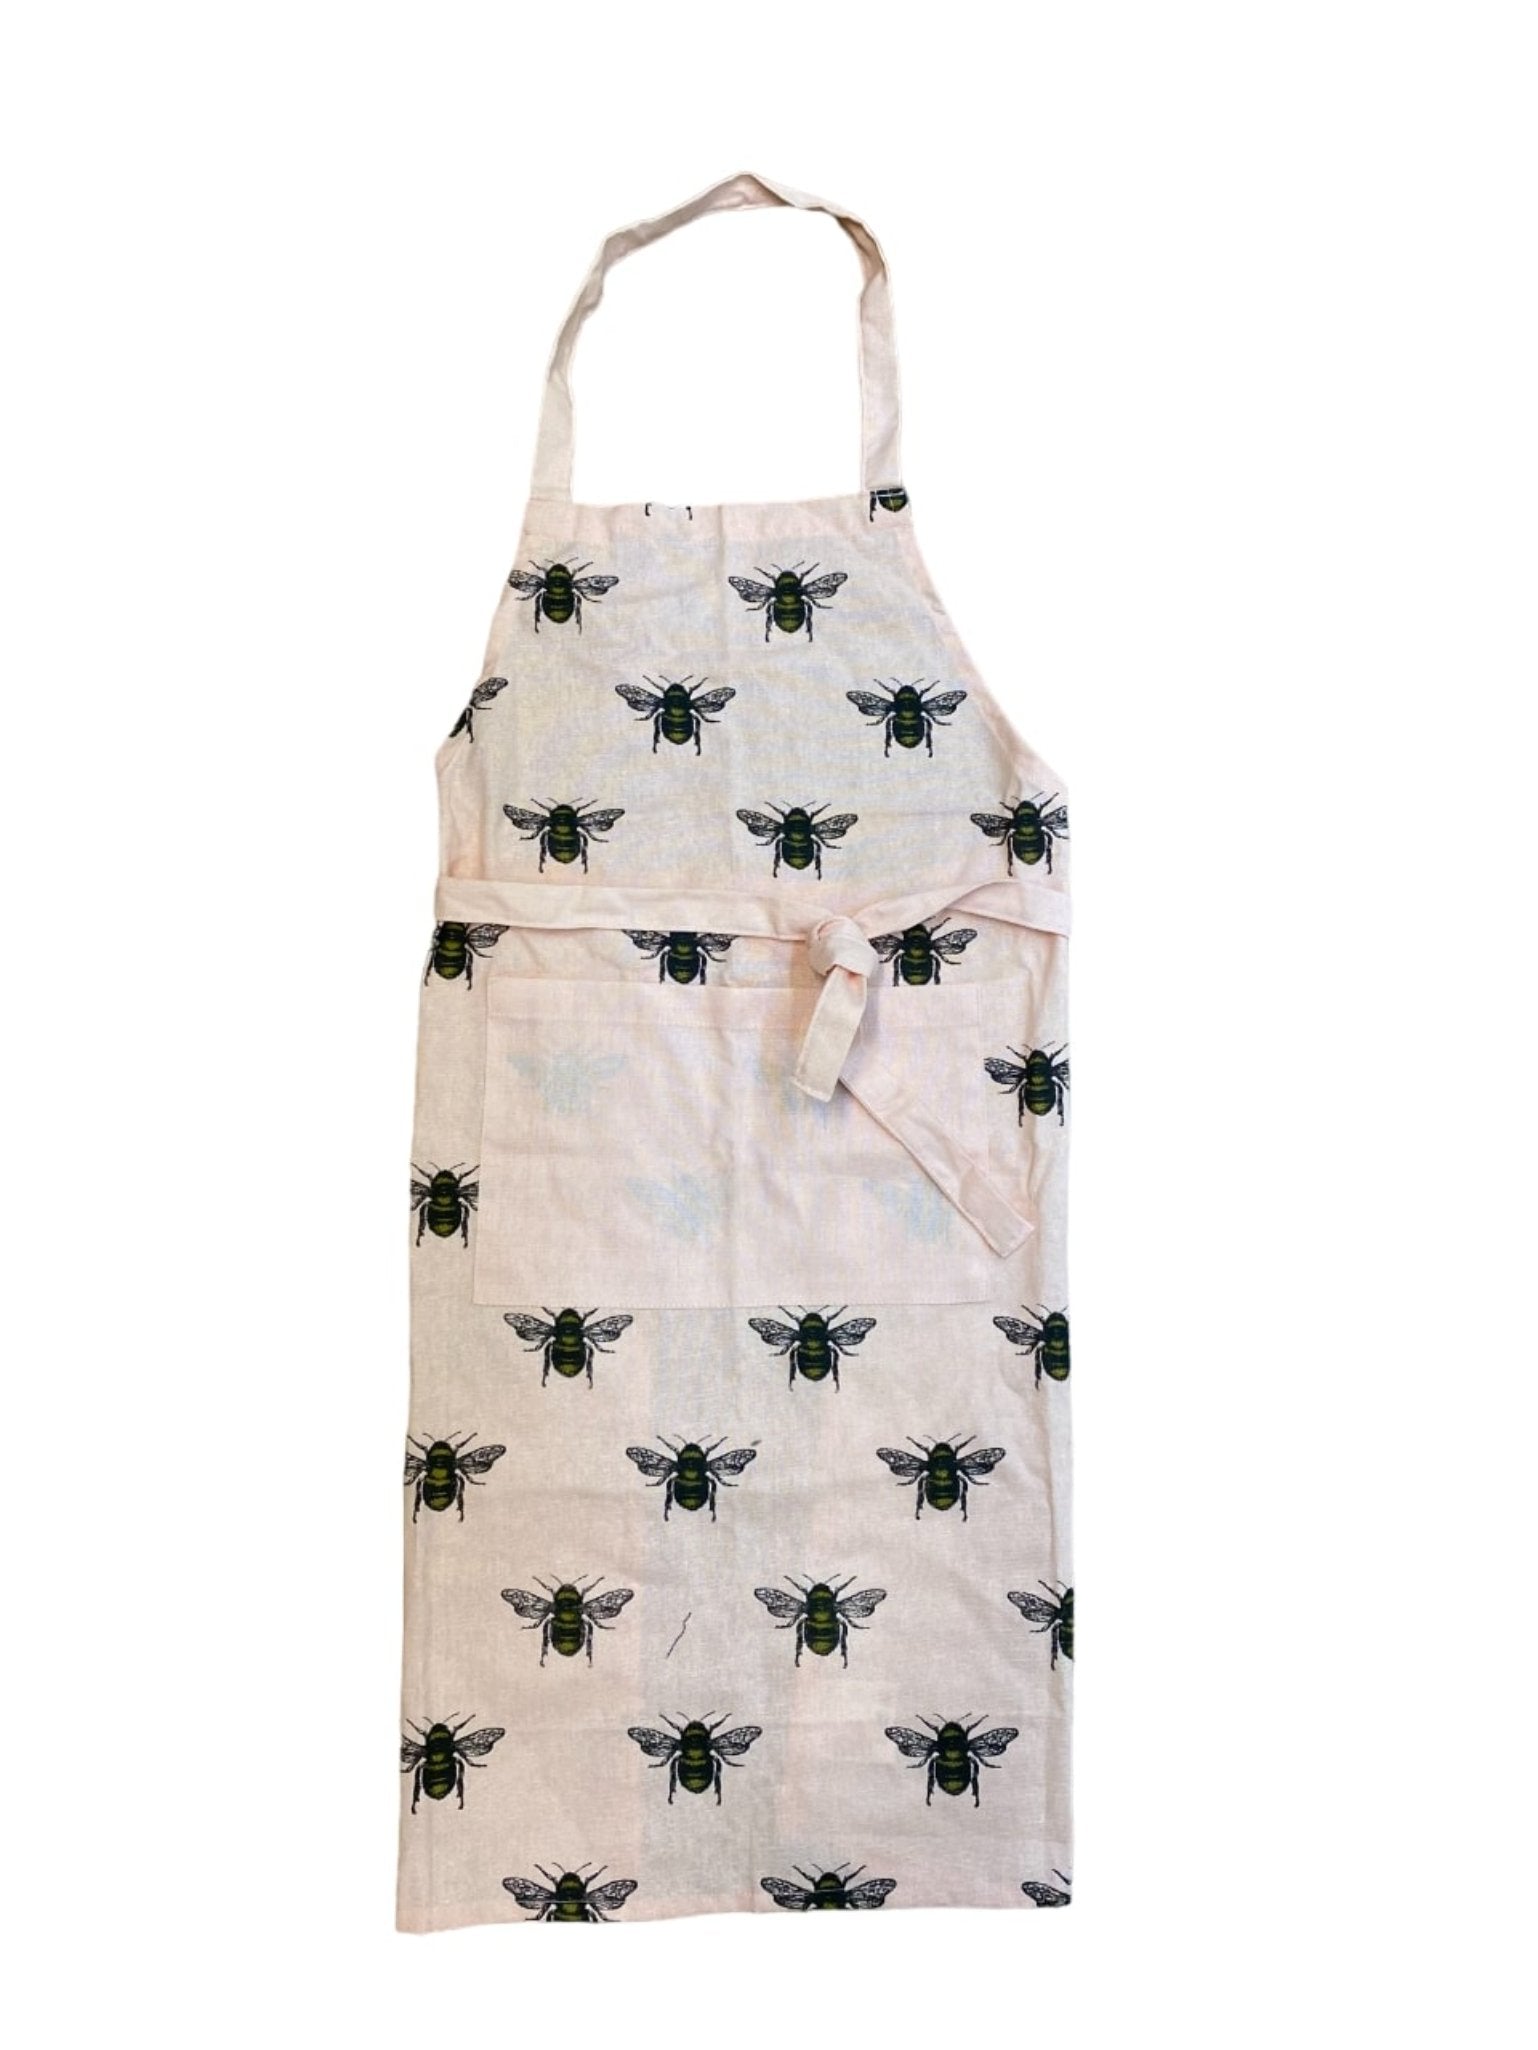 View Pink Summer Bee Apron information